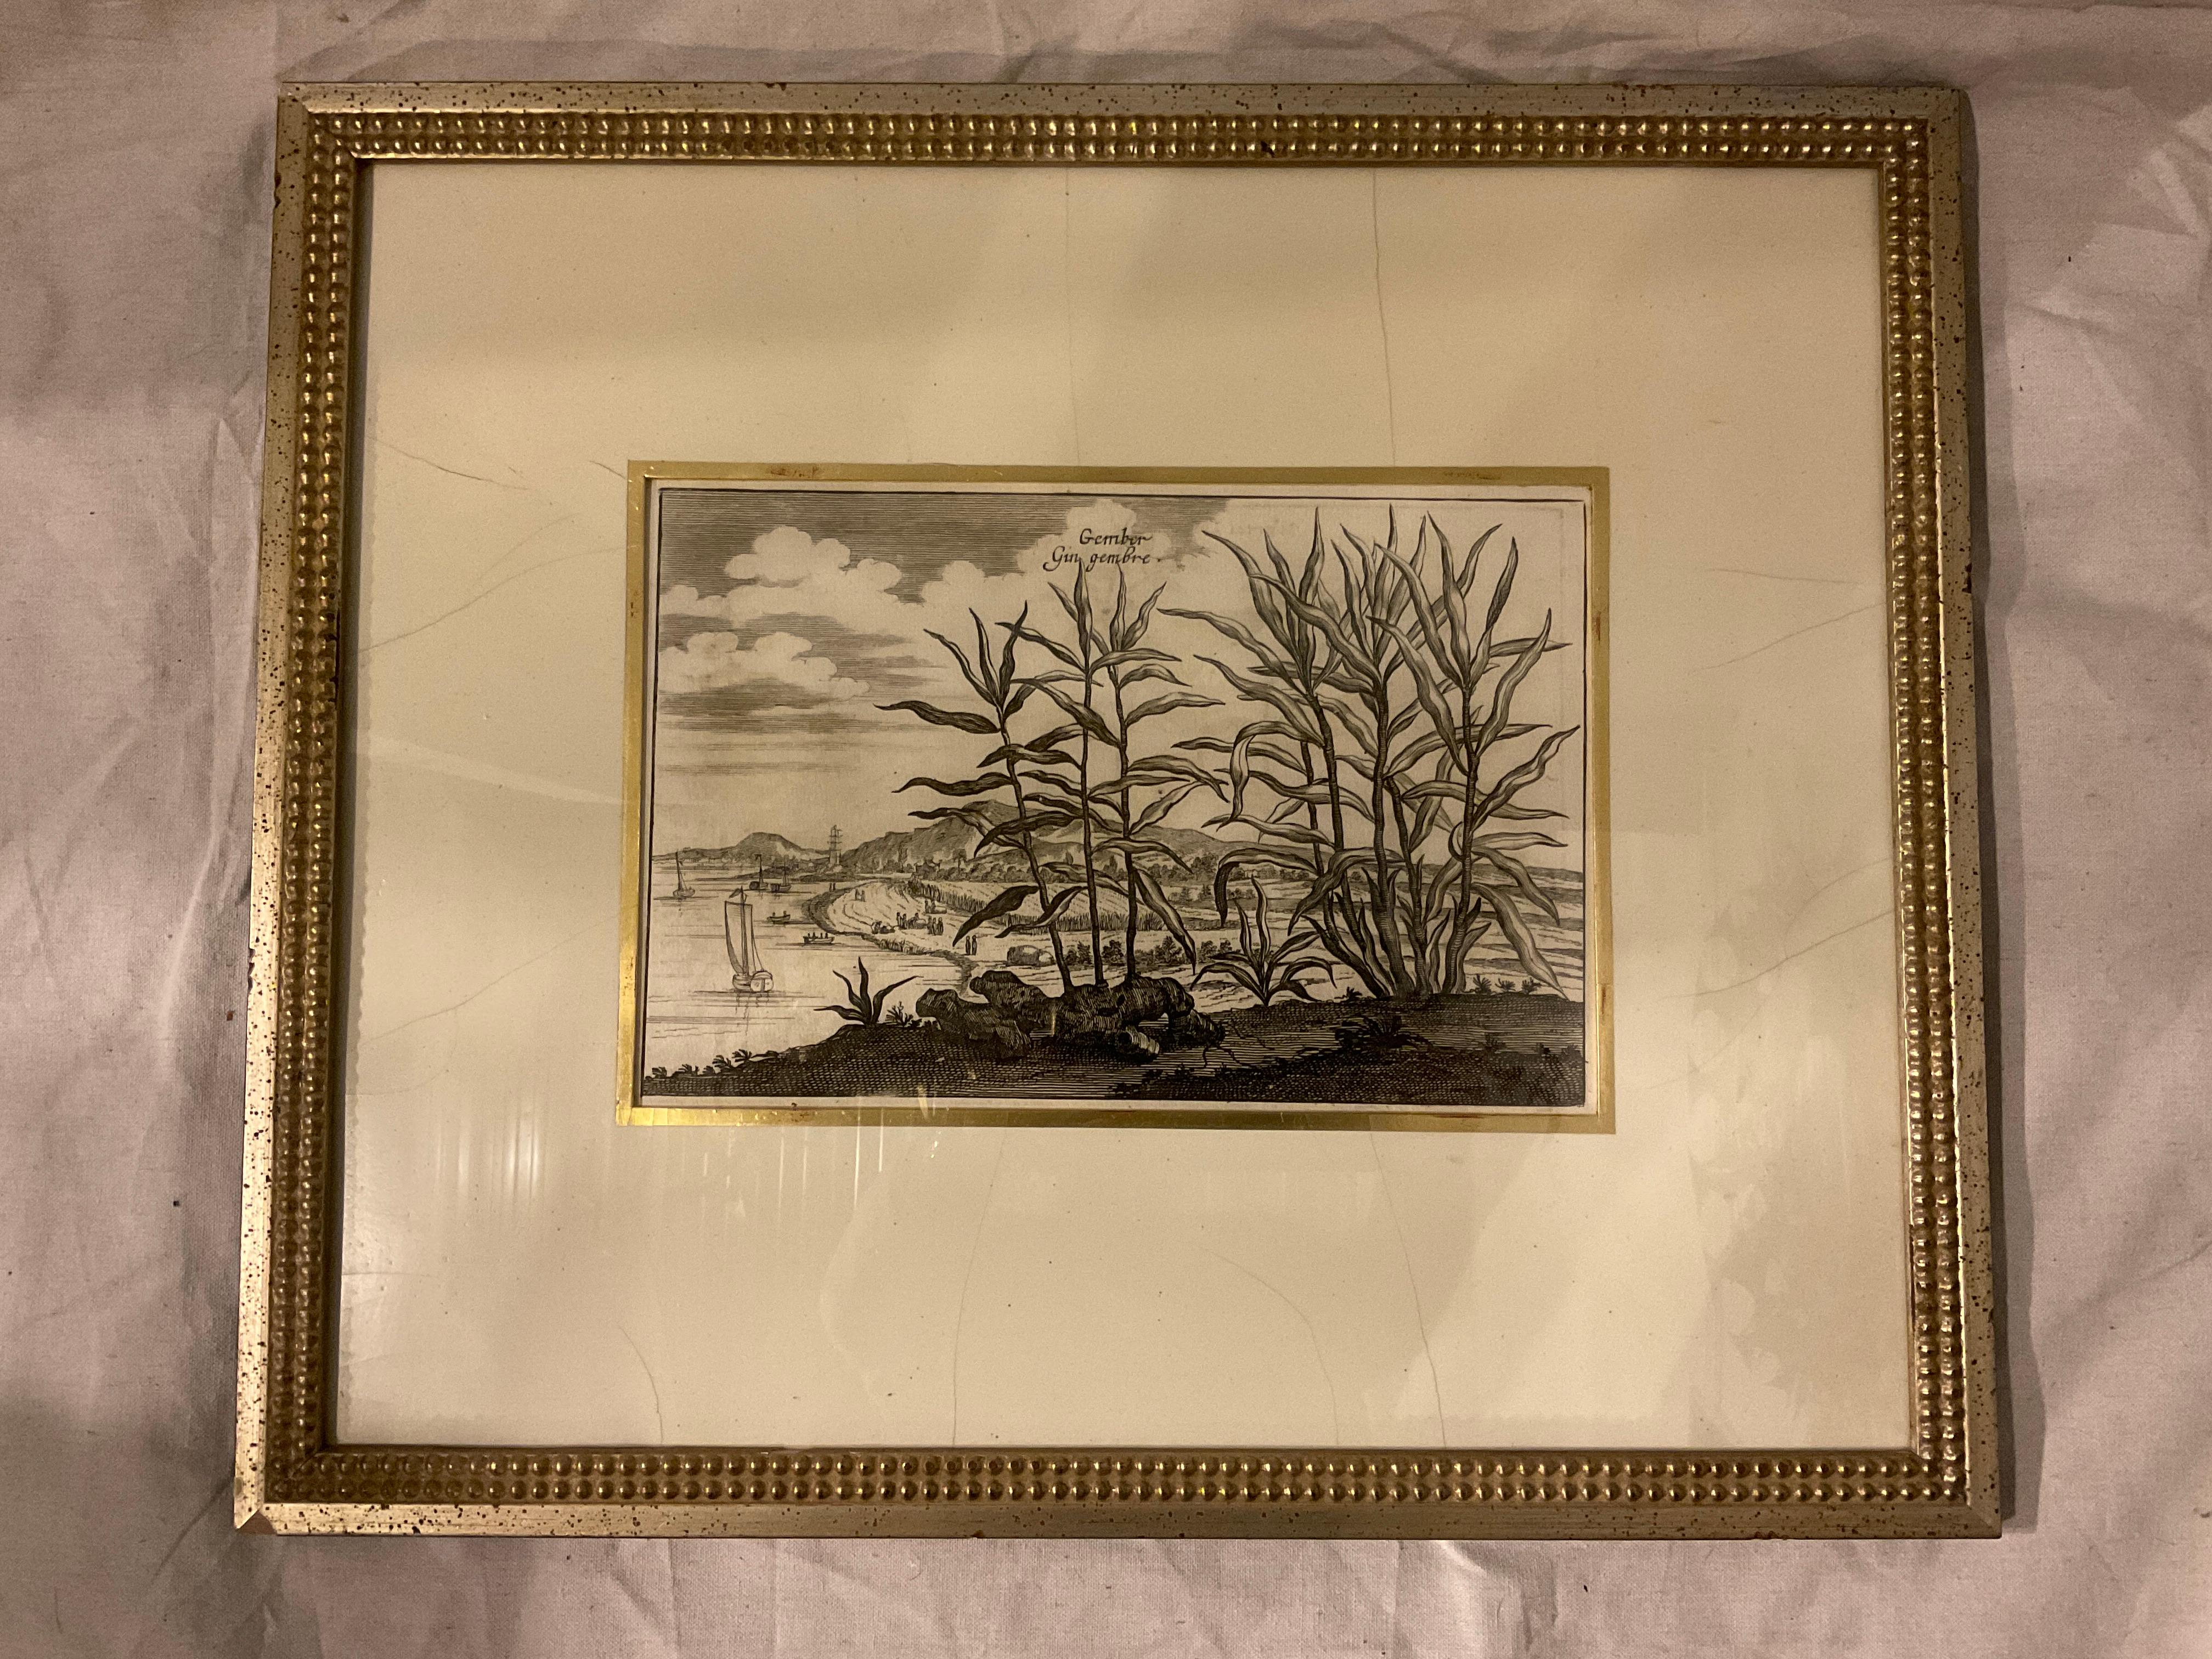 6 Soicher- Marin Tropical Landscape From Asia Prints In Silver Leaf Frames For Sale 2